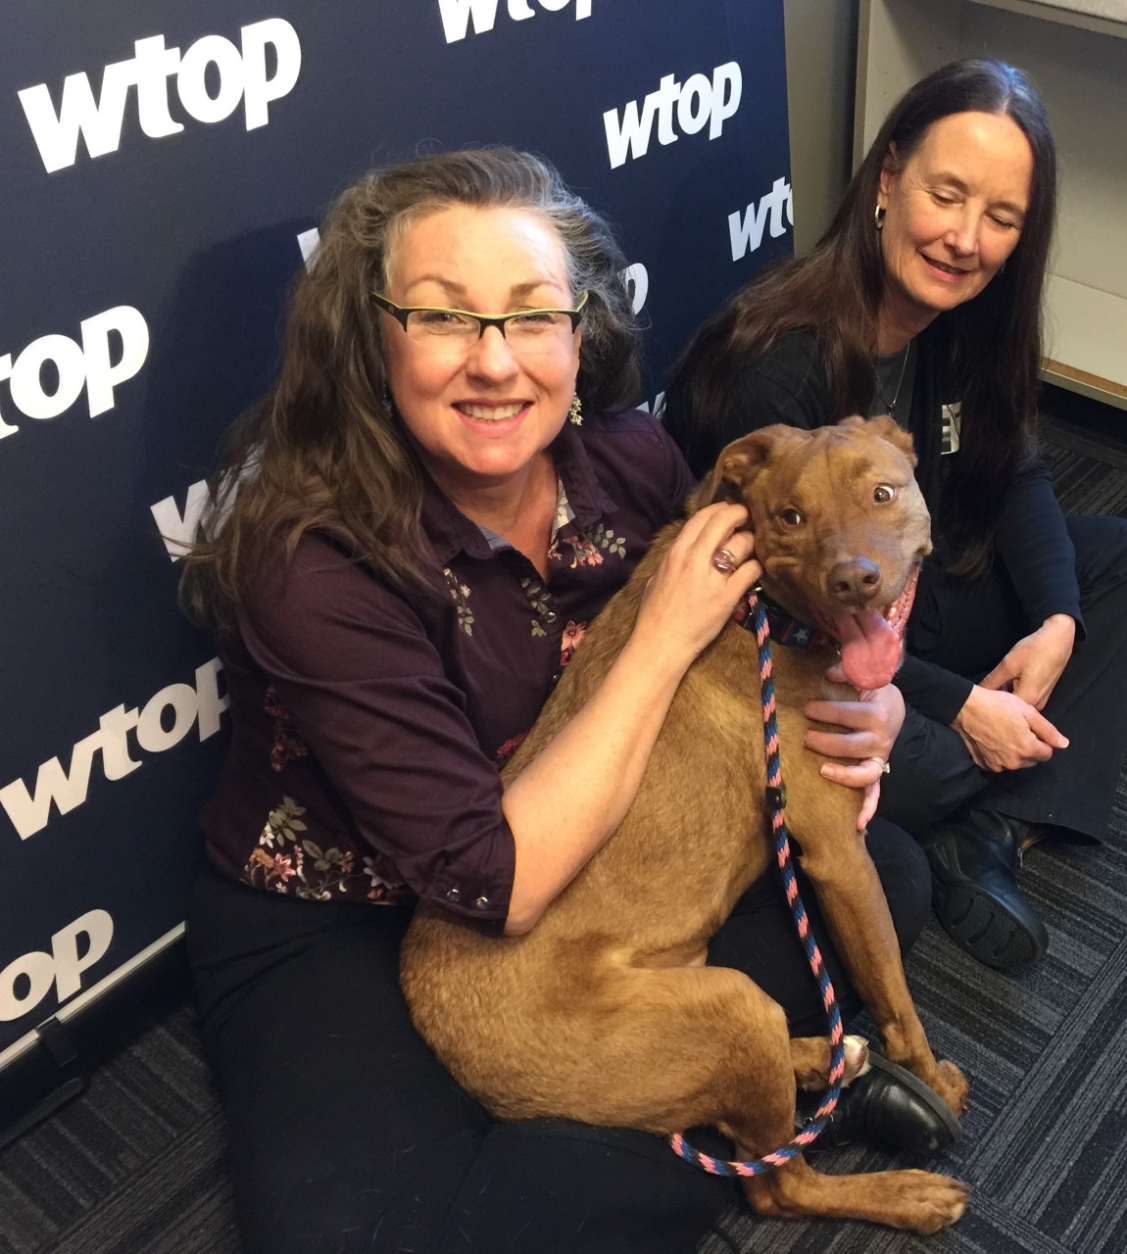 WTOP's Kristi King with Niko and Dr. Leslie Sinn. (Photo courtesy Jill Collins)